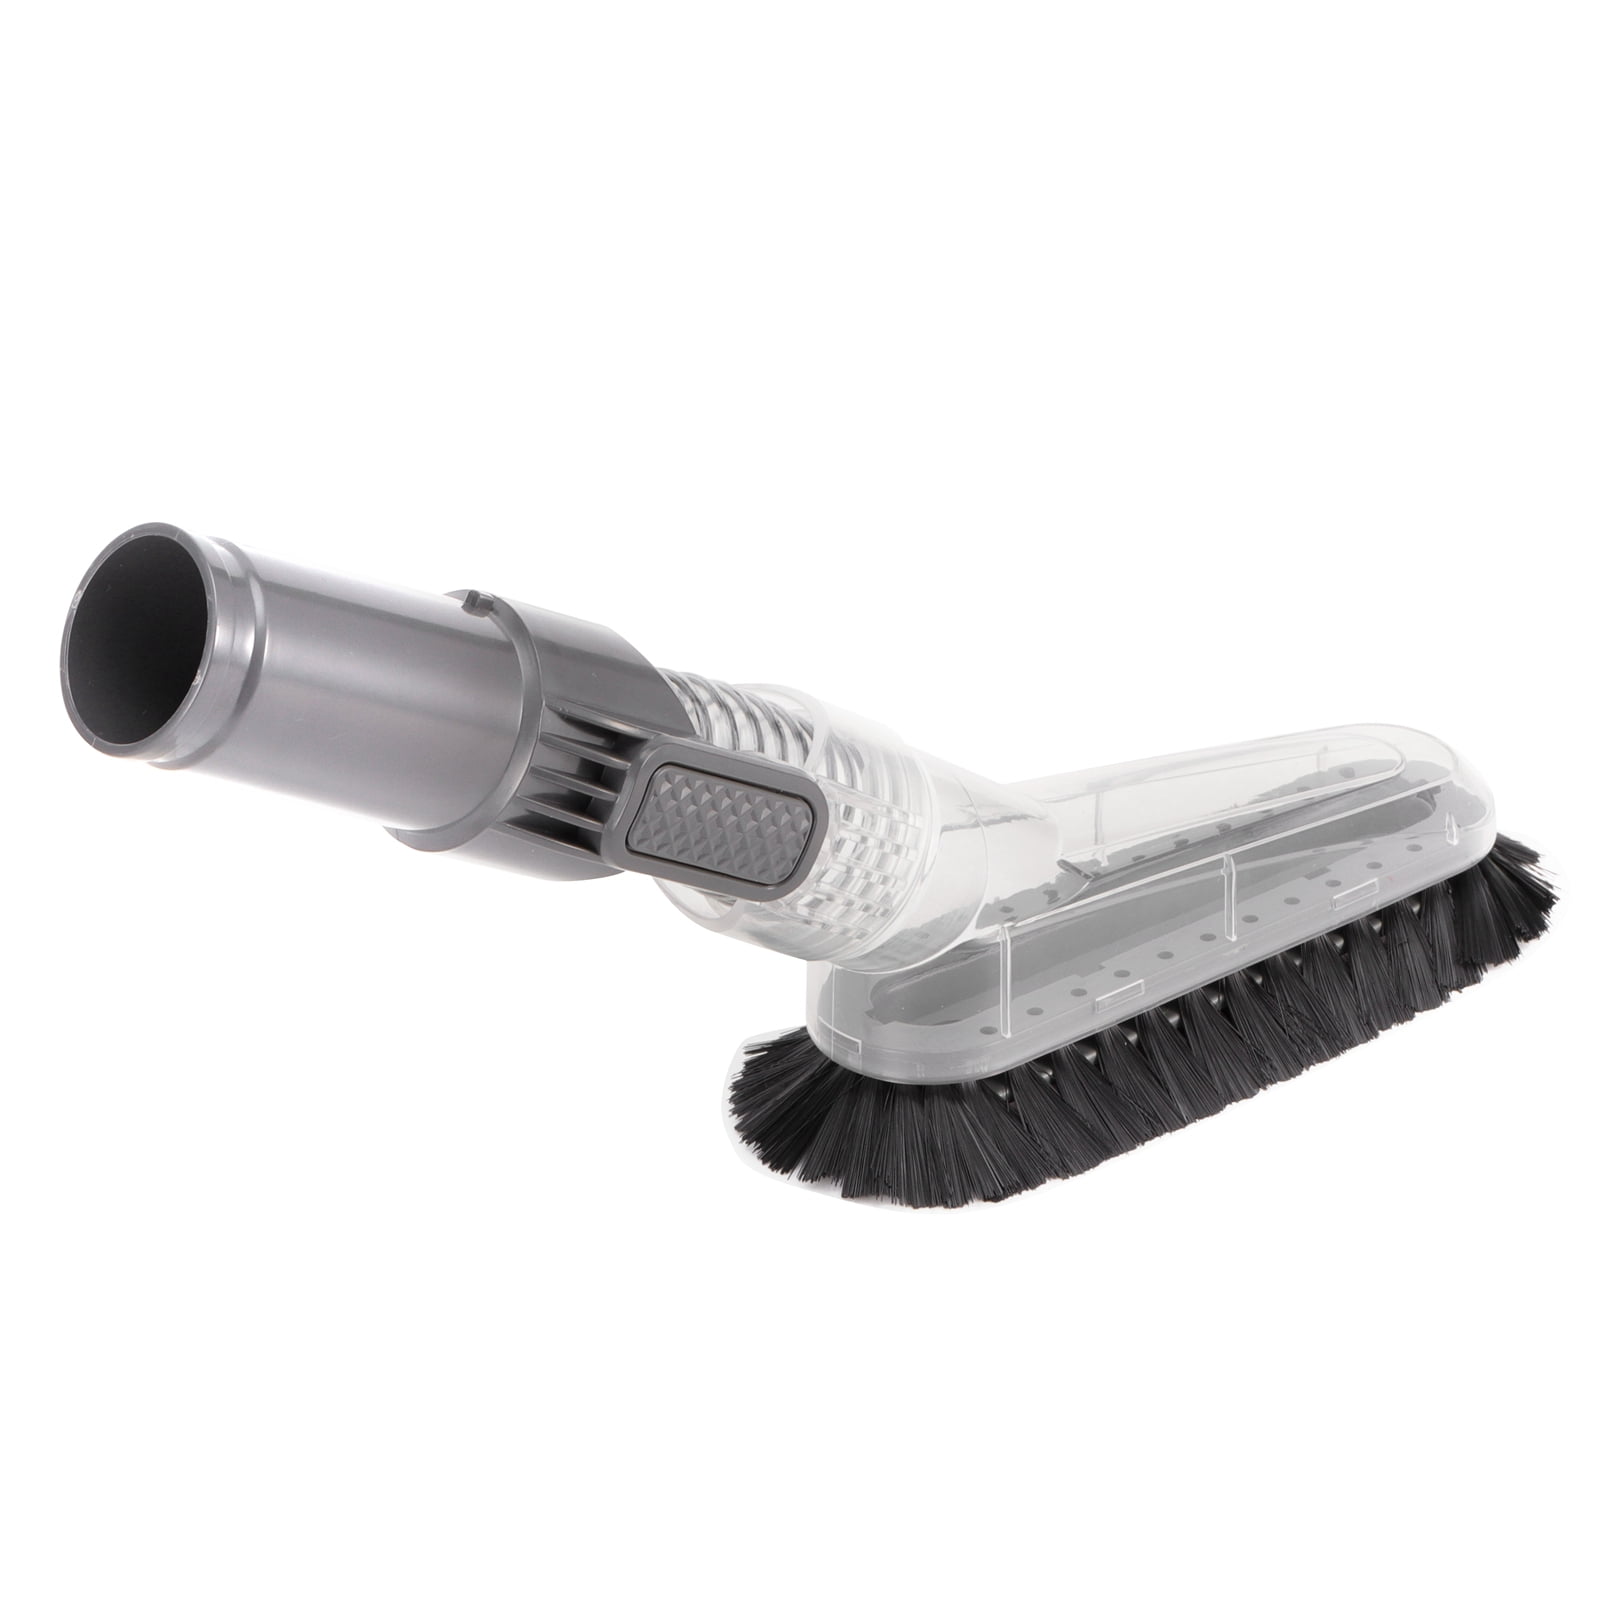 Flexible Multi-Angle Vacuum Attachment Brush Tool for Ceiling Fan Dia 32mm 